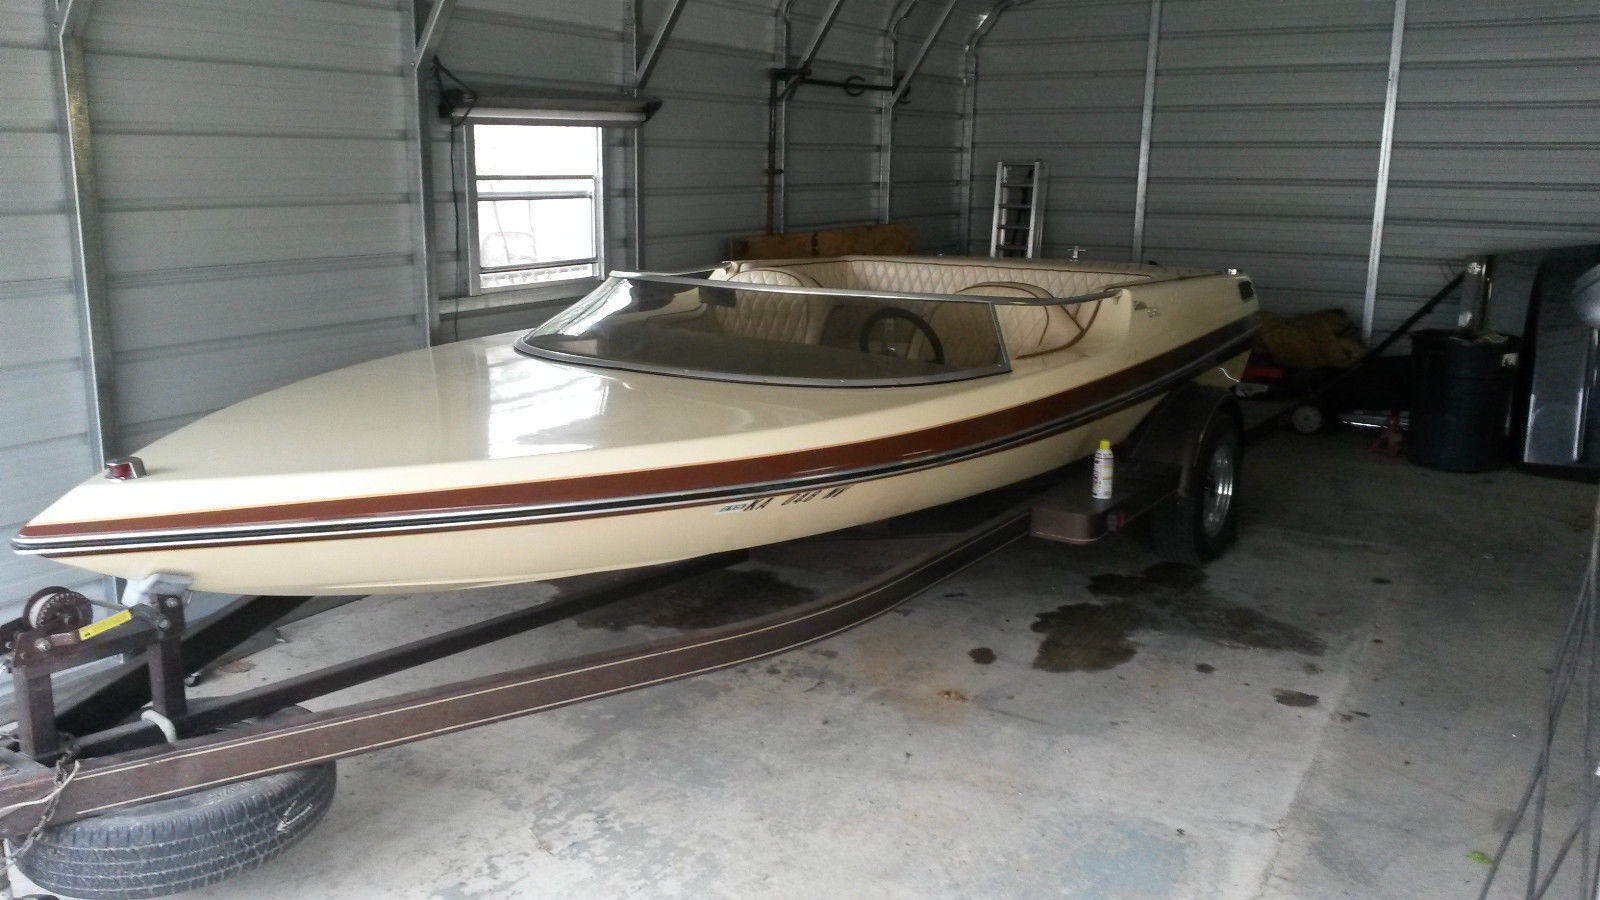 Taylor SS 1978 for sale for $1,000 - Boats-from-USA.com